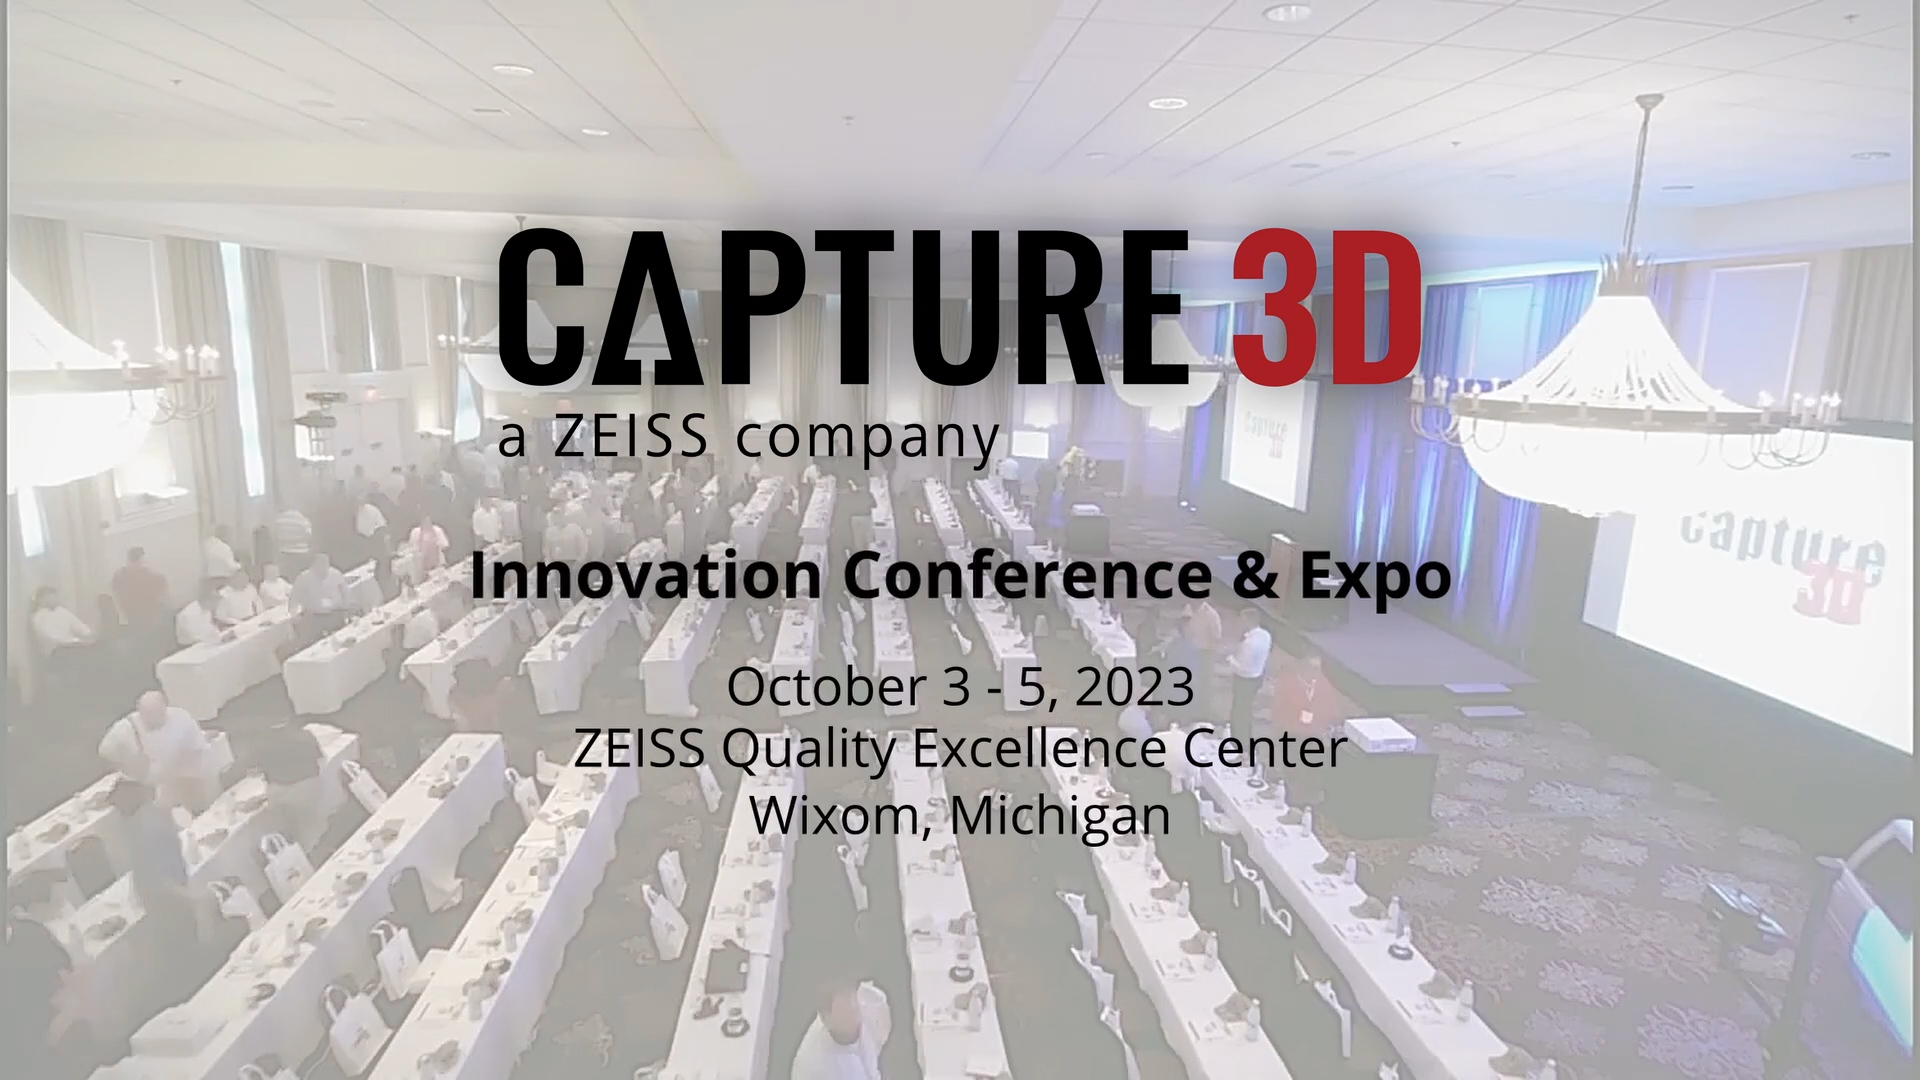 The CAPTURE 3D Innovation Conference & Expo brings together the manufacturing and engineering community to learn how advanced 3D metrology technologies enable digitalization to support a sustainable future for manufacturing. CAPTURE 3D is hosting the event October 3-5, 2023 at the ZEISS Quality Excellence Center in Wixom, Michigan.